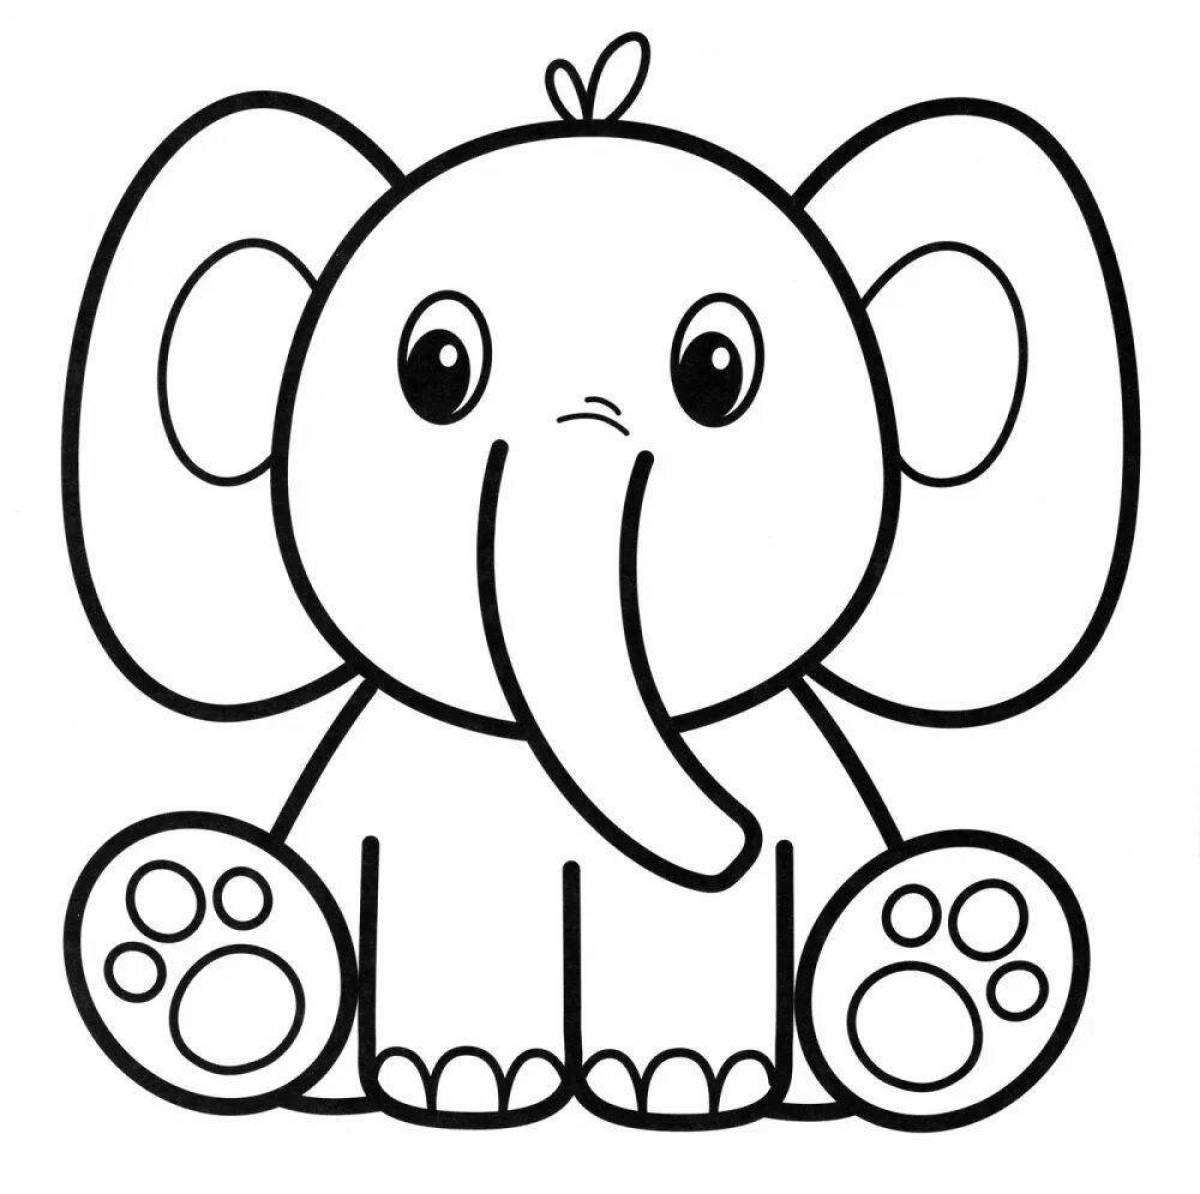 Coloring cute elephant for children 3-4 years old